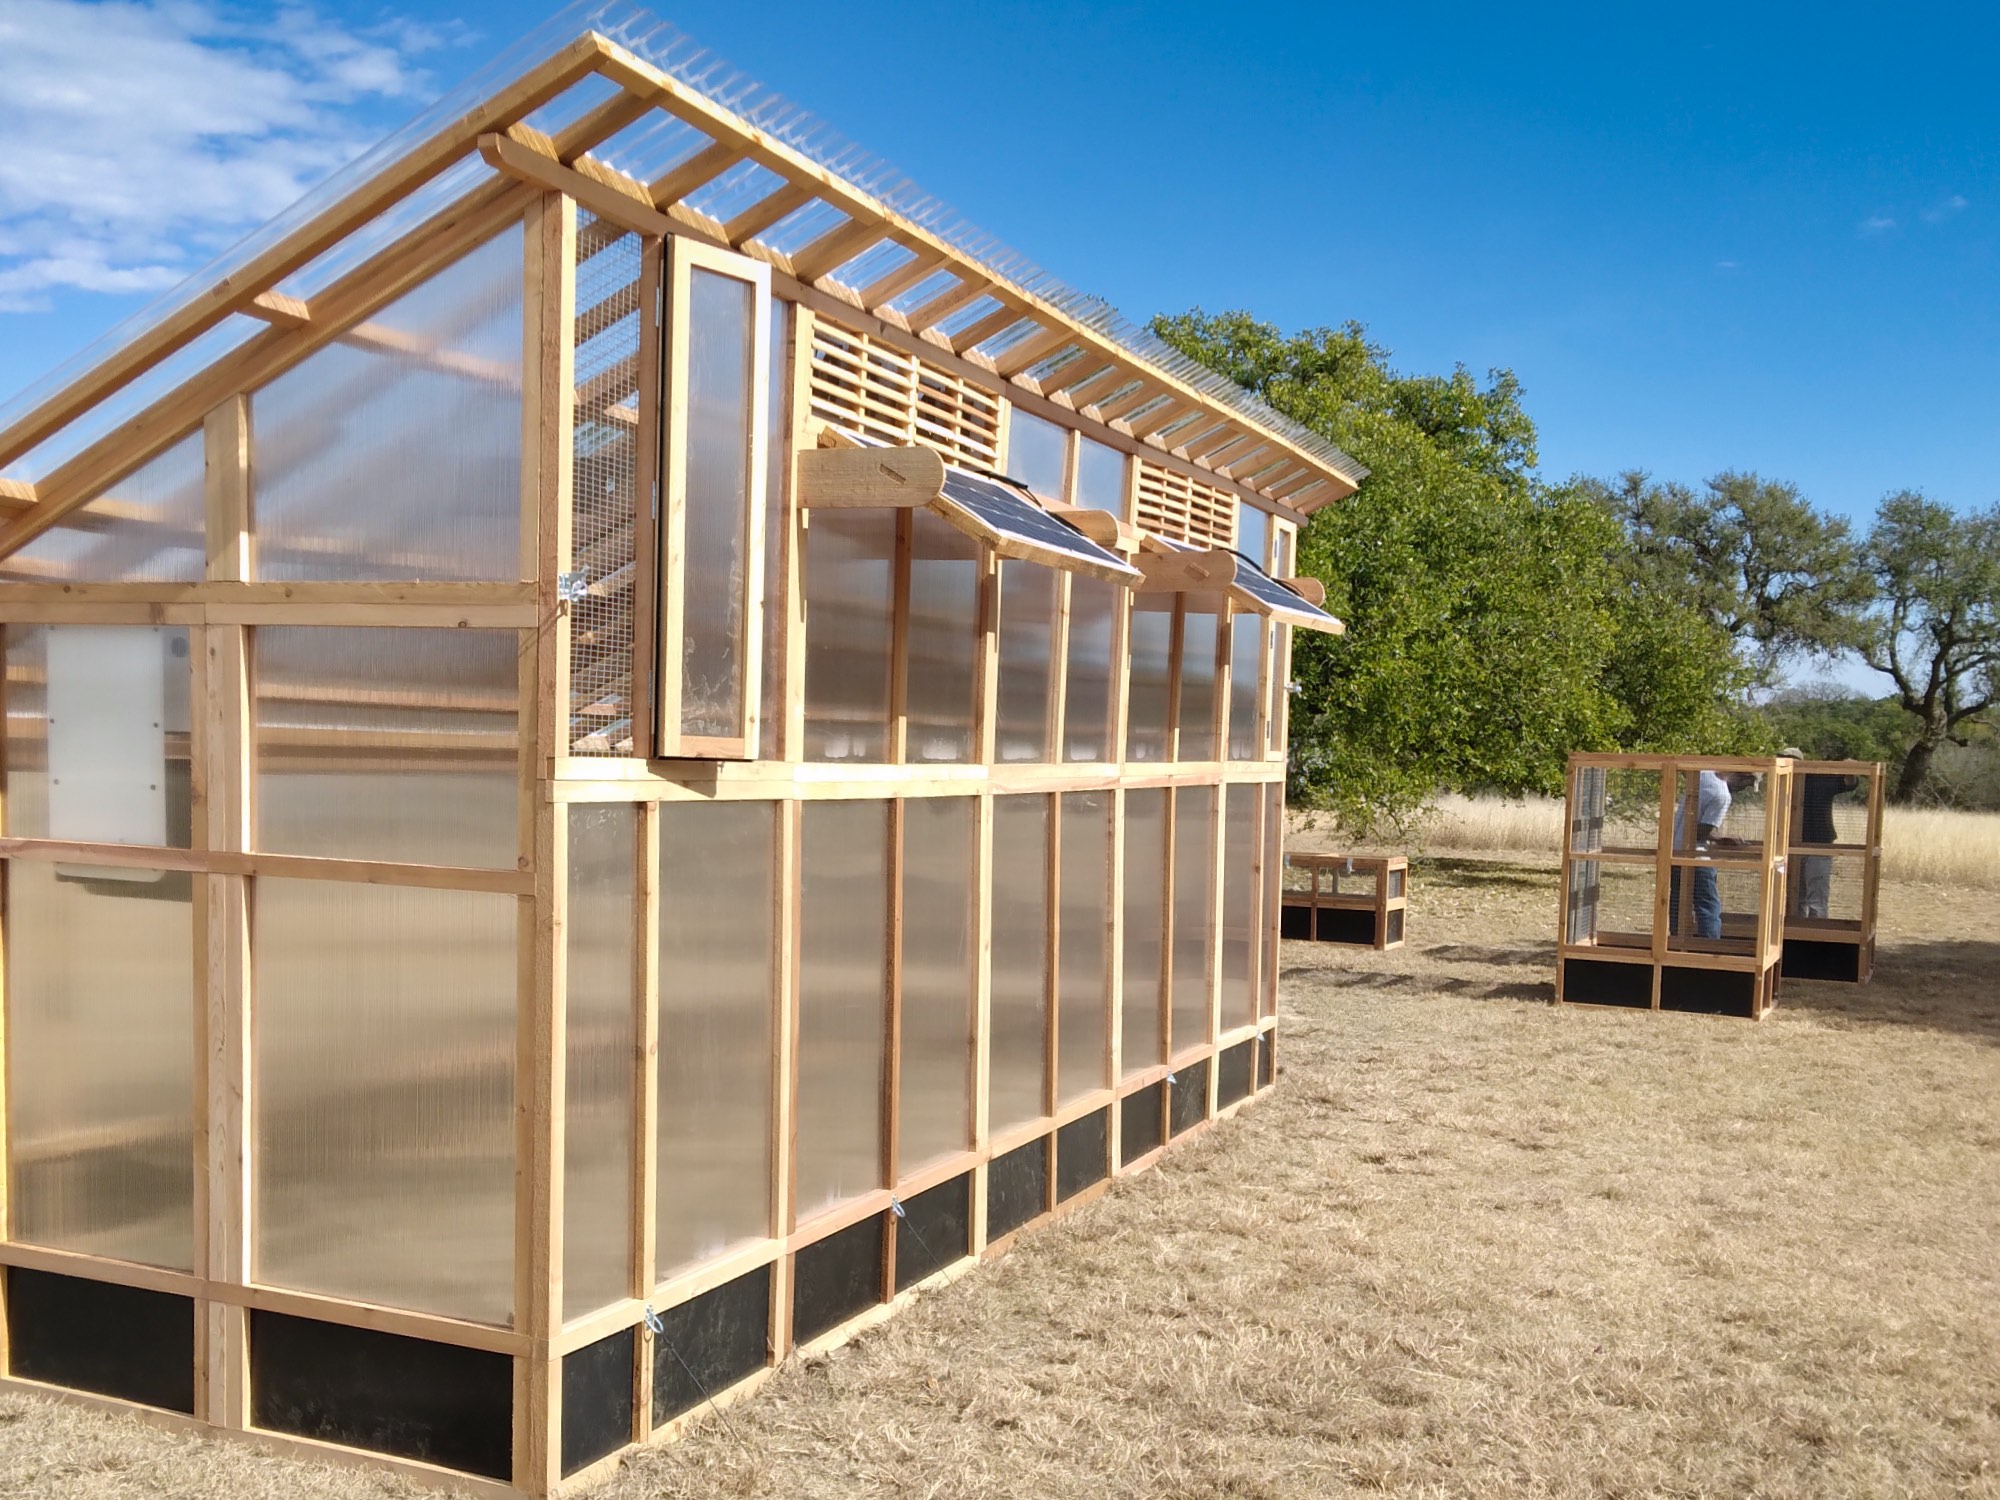 Slant-Roof-XL-Greenhouse-with-Garden-Beds